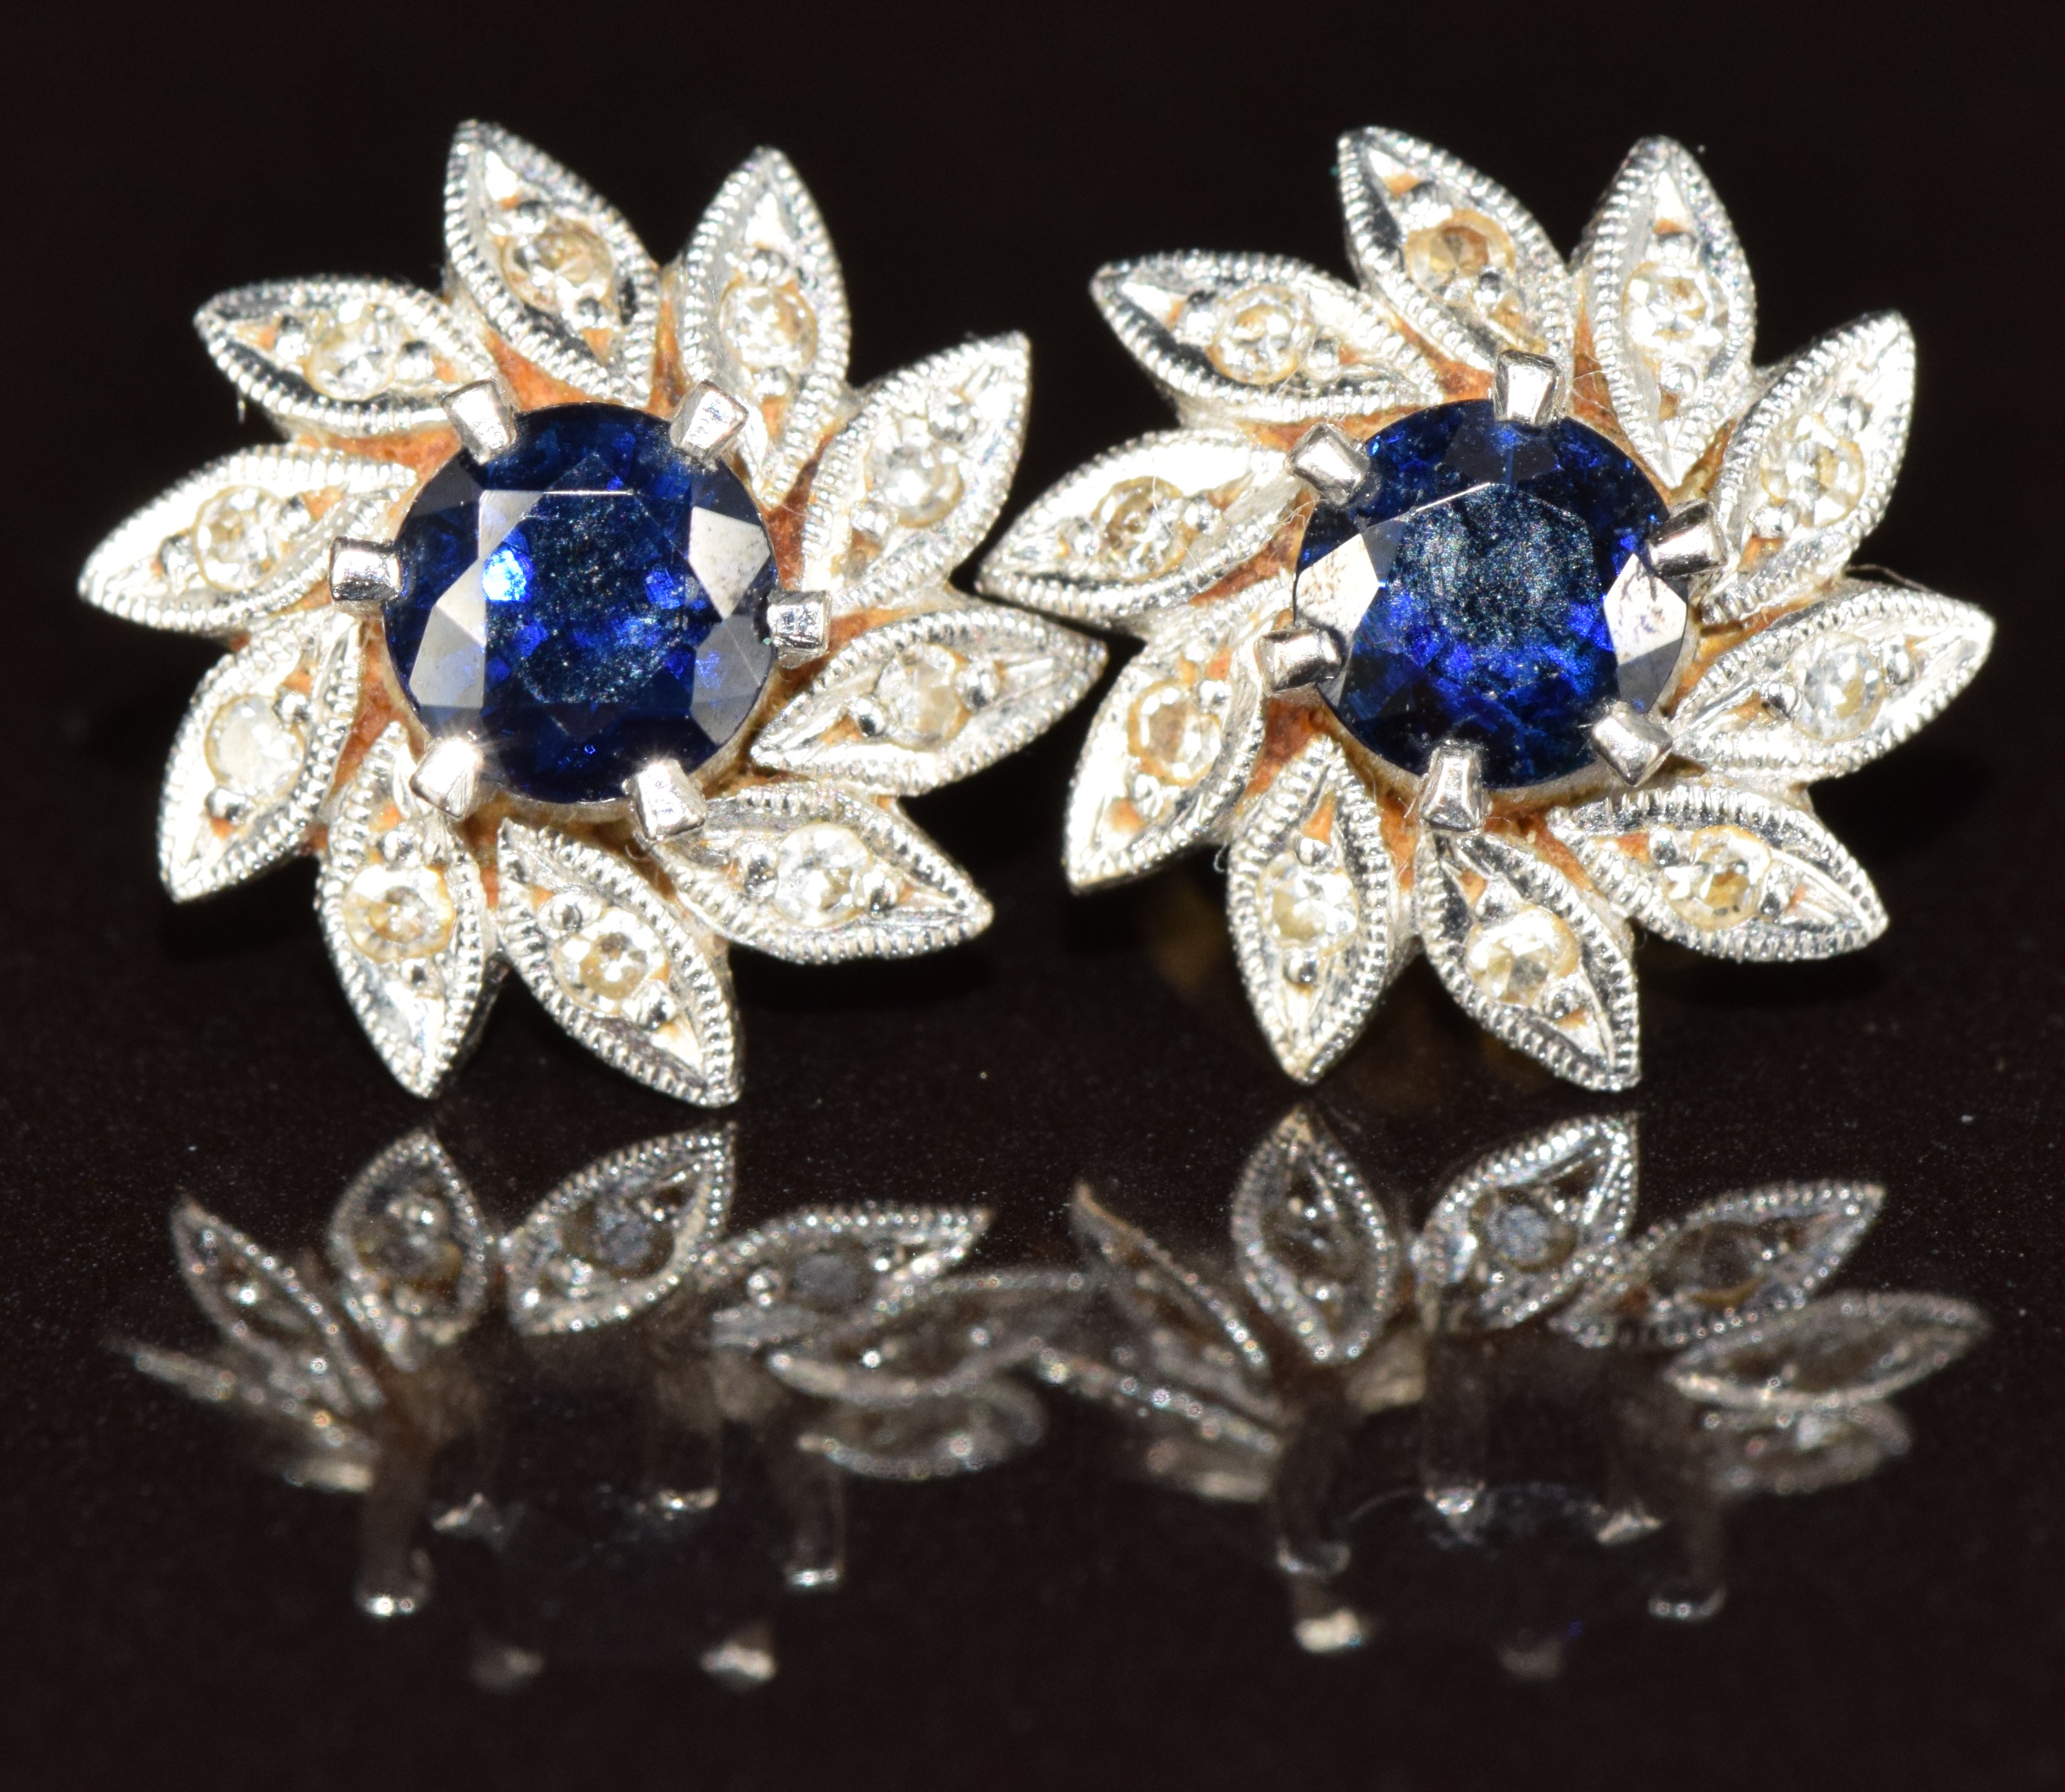 A pair of 18ct white gold earrings each set with a sapphire surrounded by diamonds, 2.6g